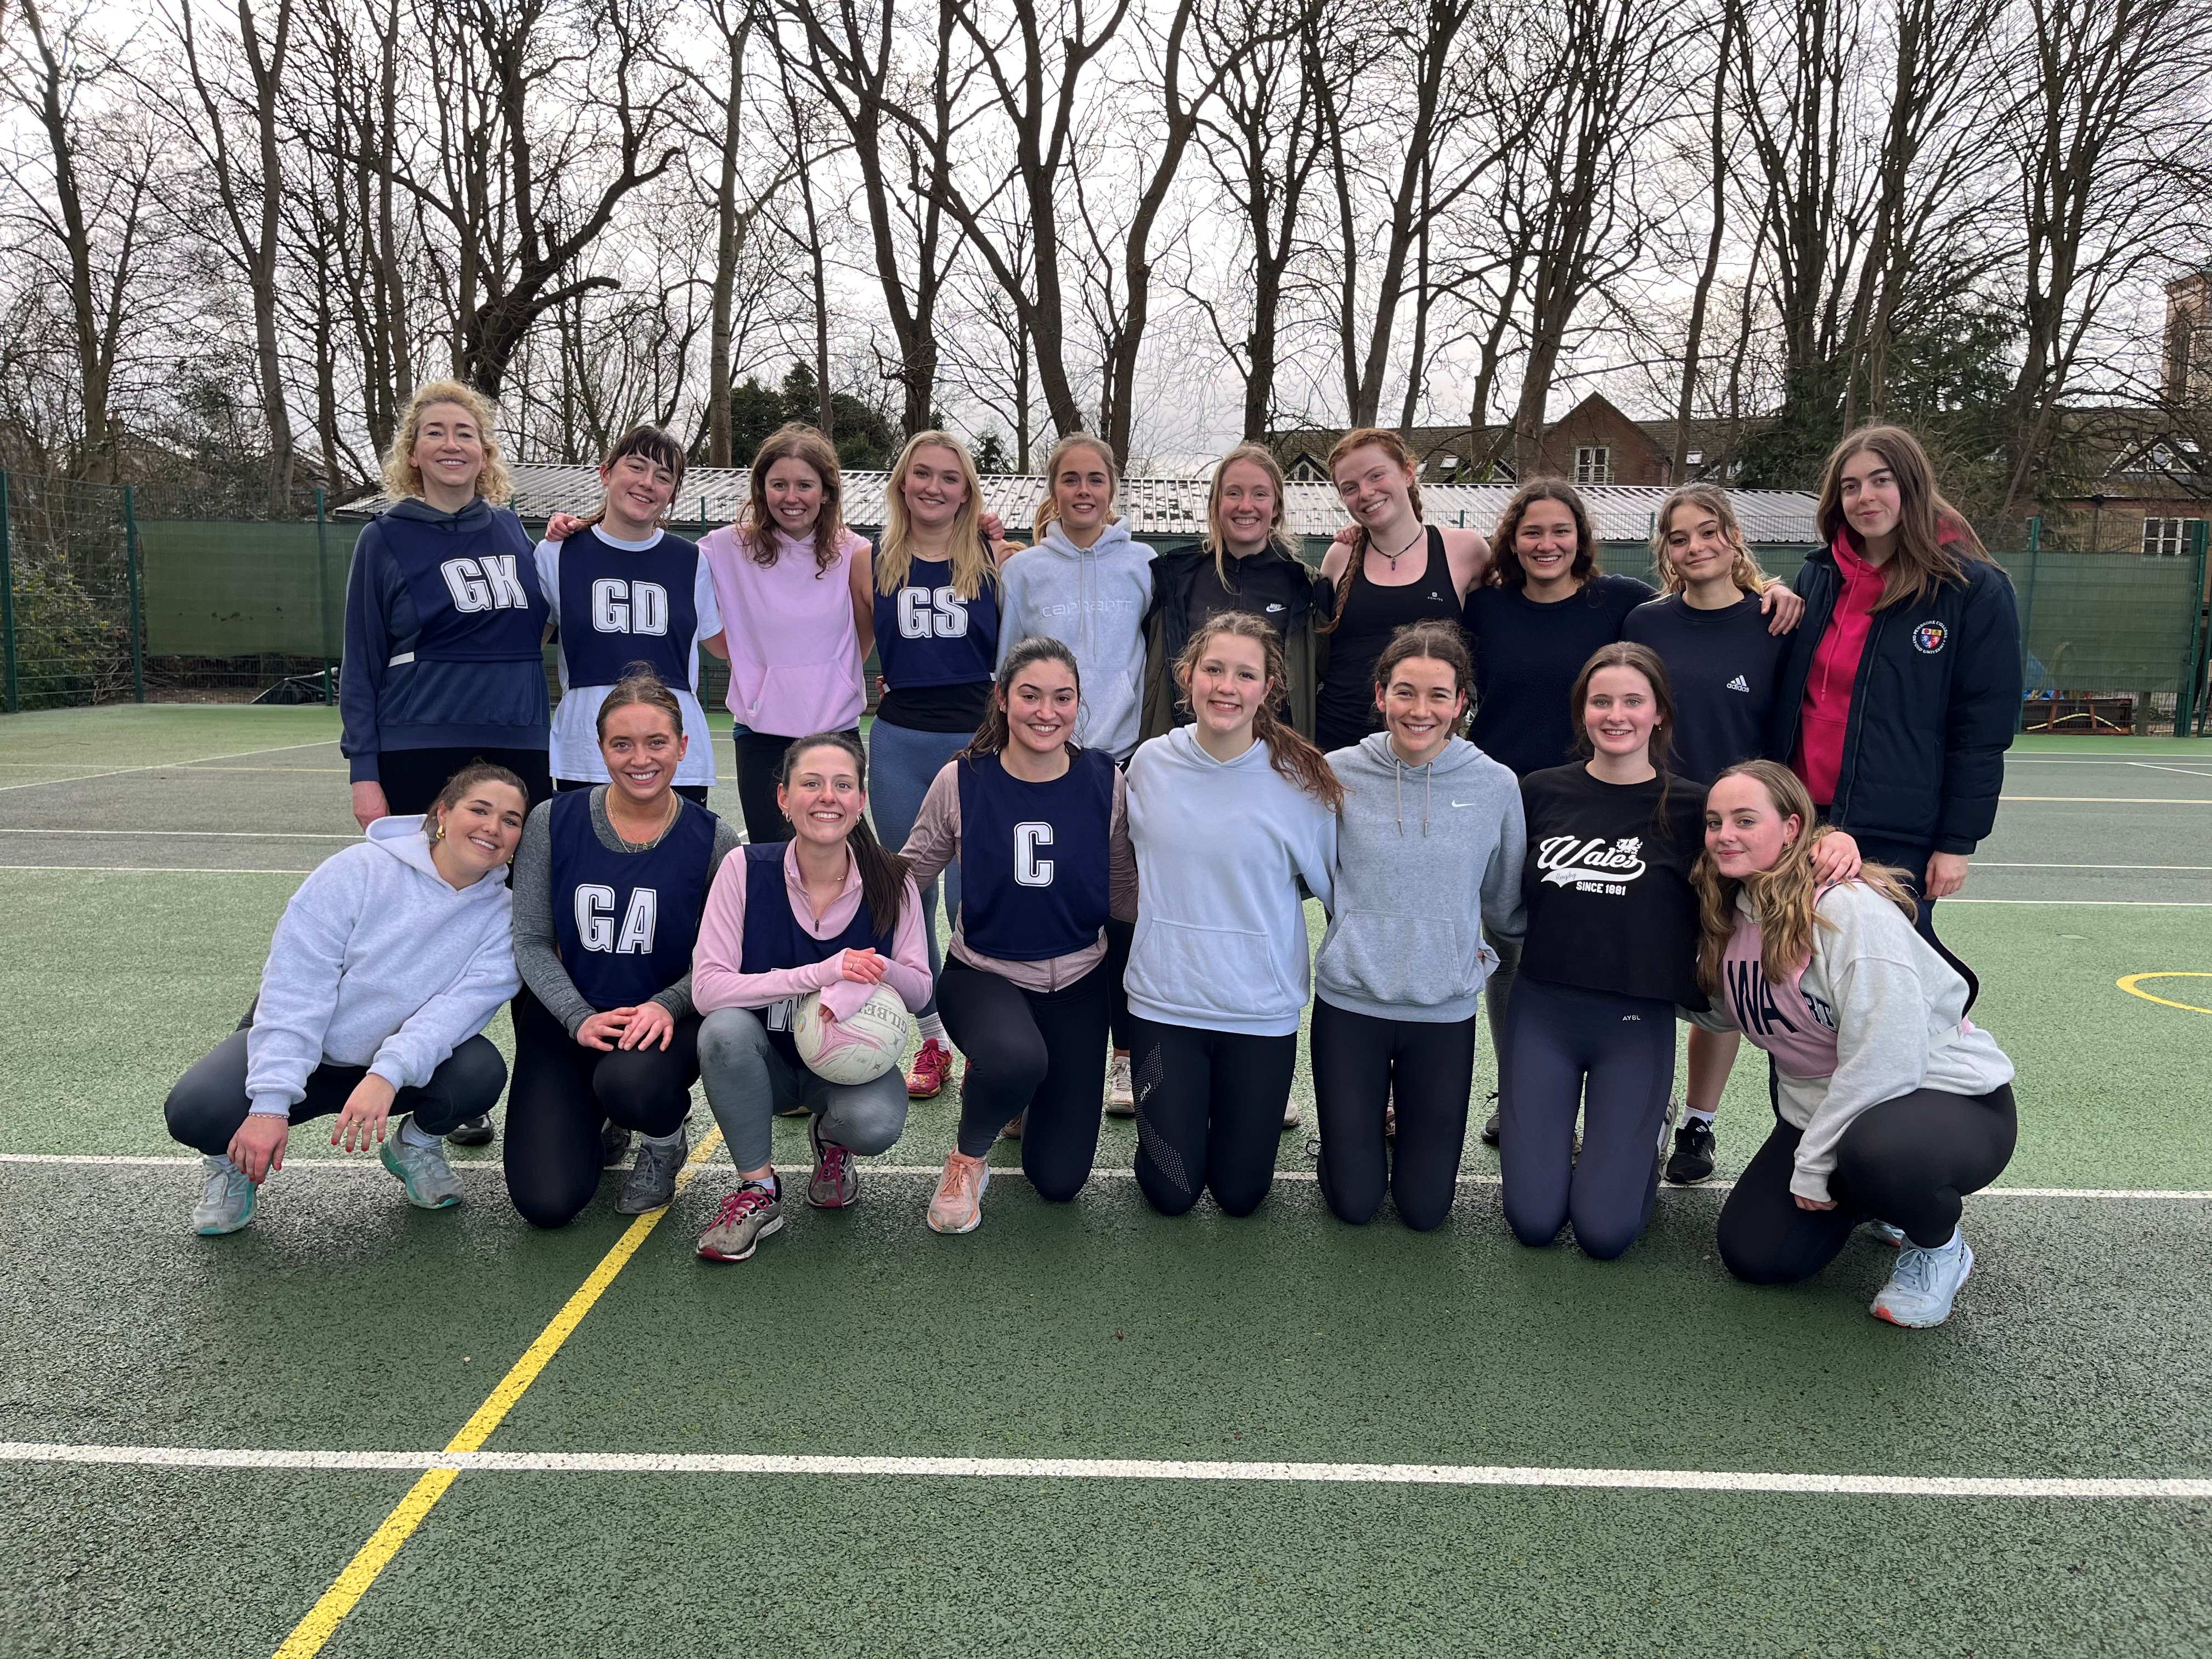 The Pembroke Netball team and alumni at their match last weekend.